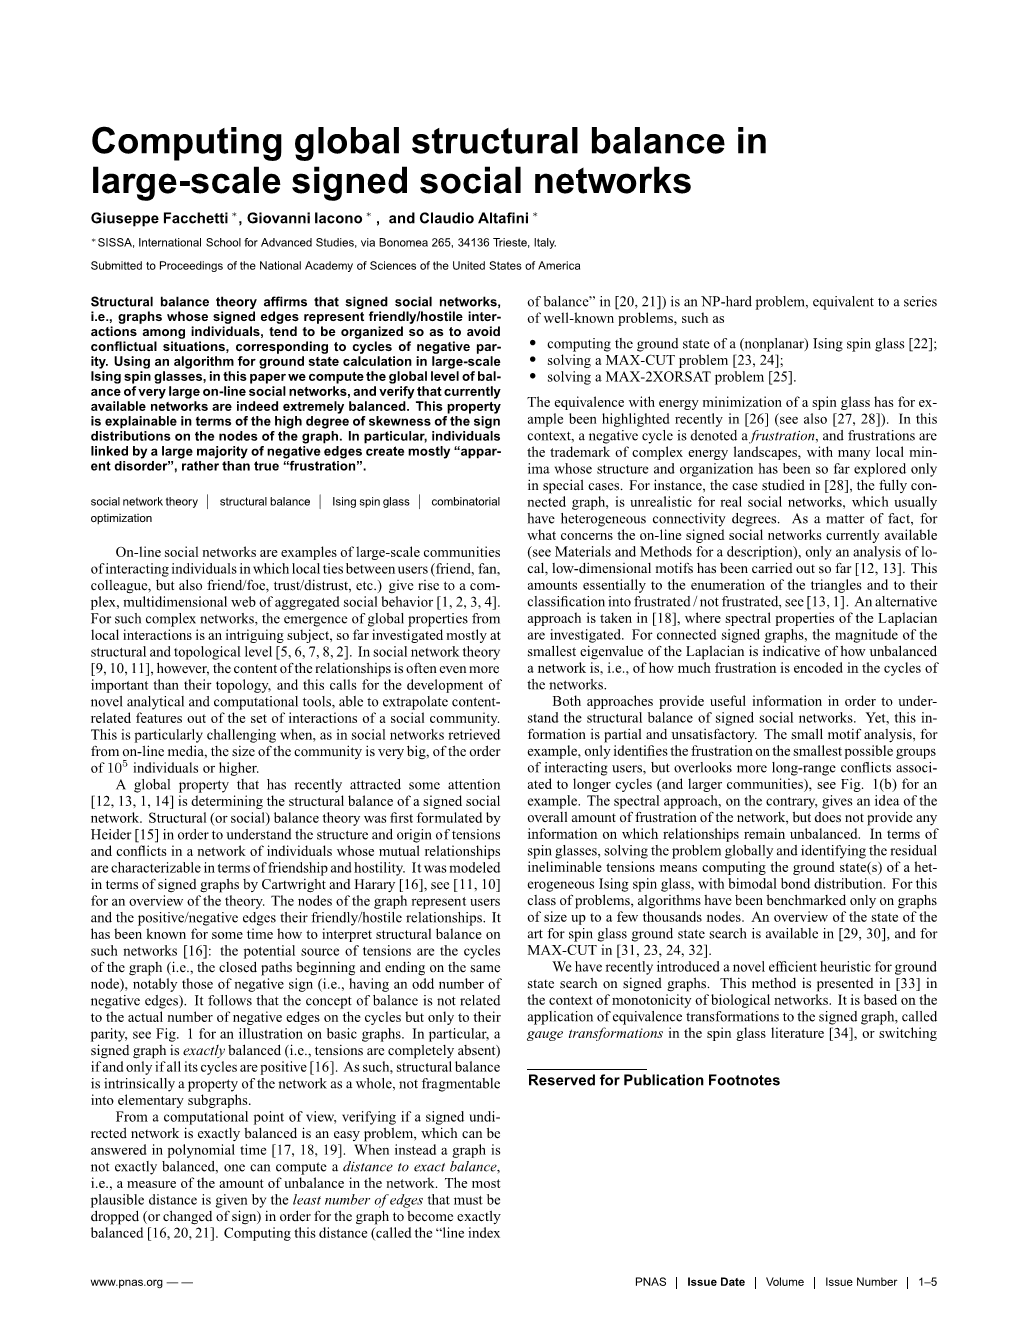 Computing Global Structural Balance in Large-Scale Signed Social Networks